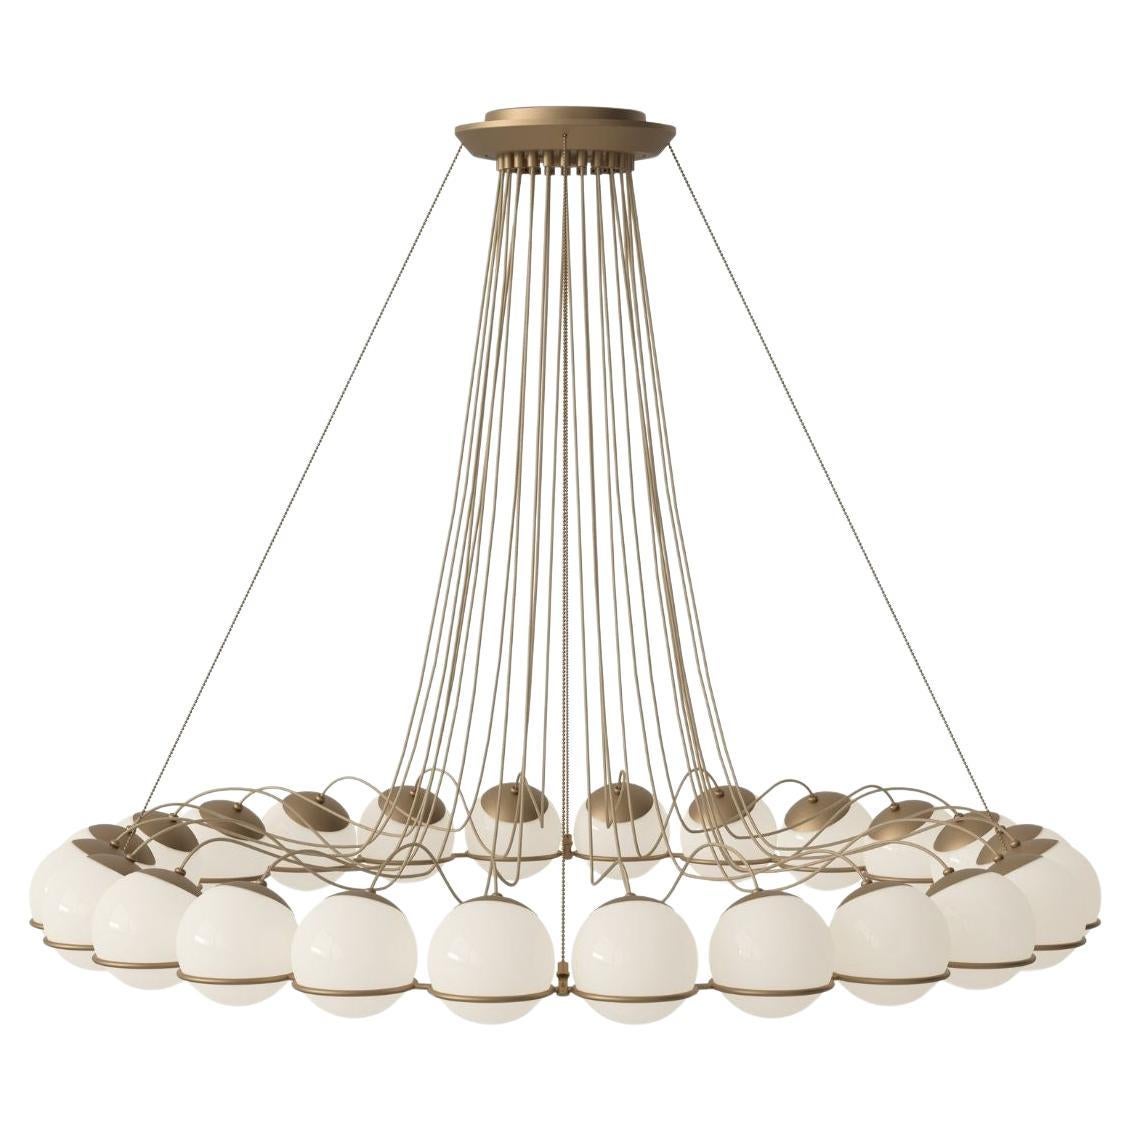 Monumental Gino Sarfatti Model 2109/24/14 Chandelier in Champagne for Astep